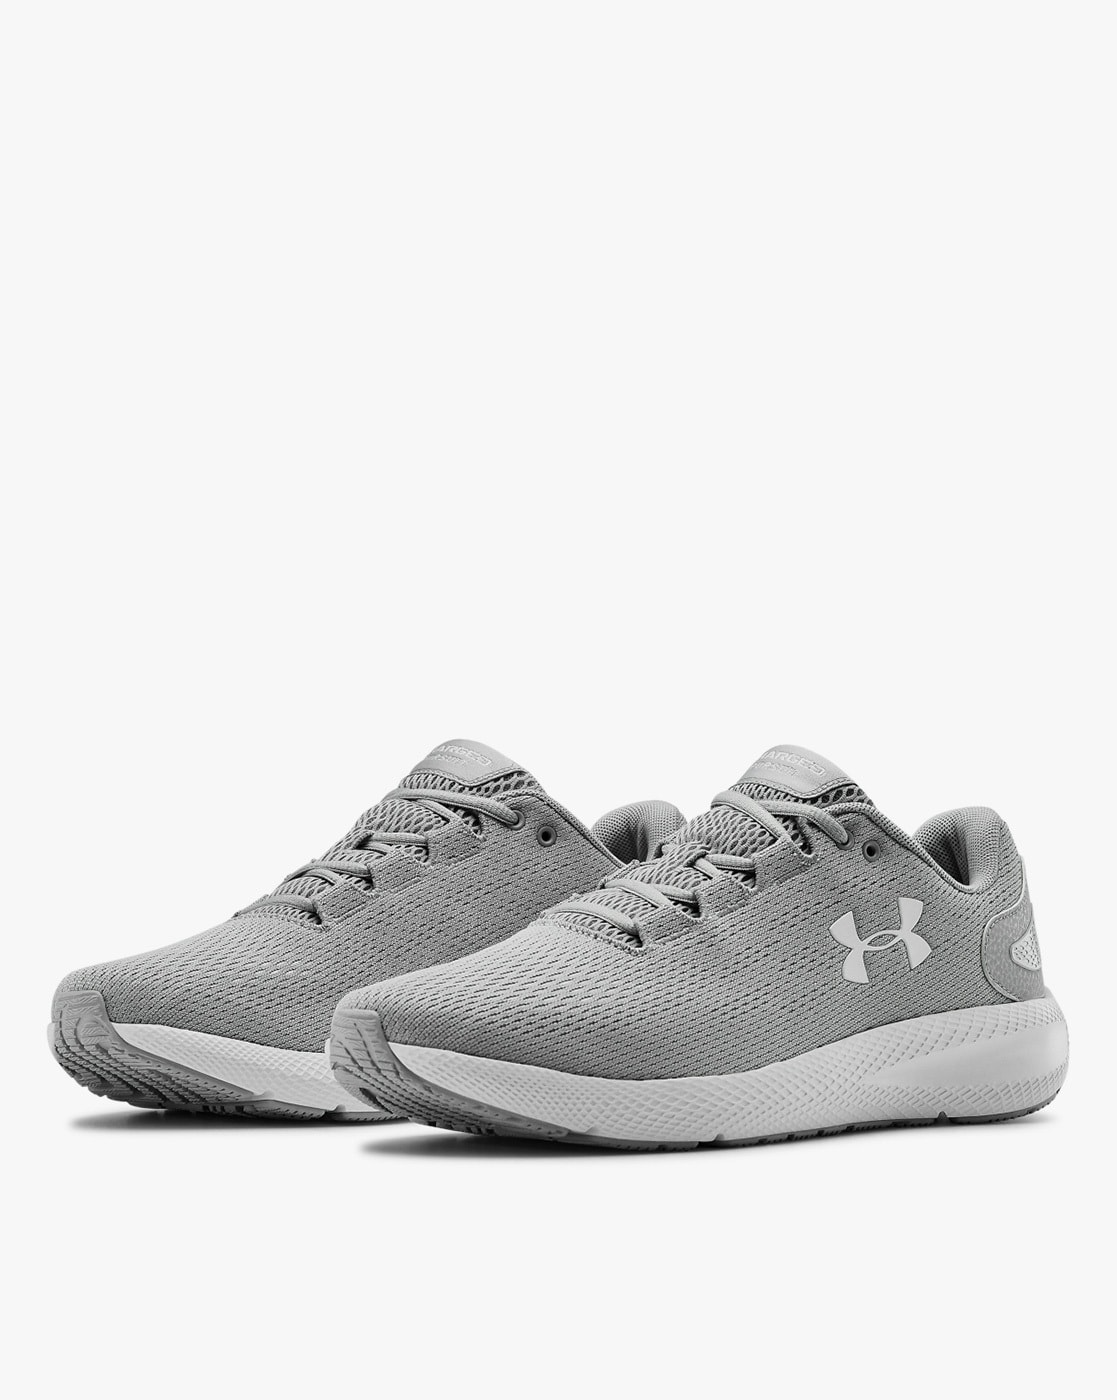 Under Armour Mens Shoes Grey | vlr.eng.br